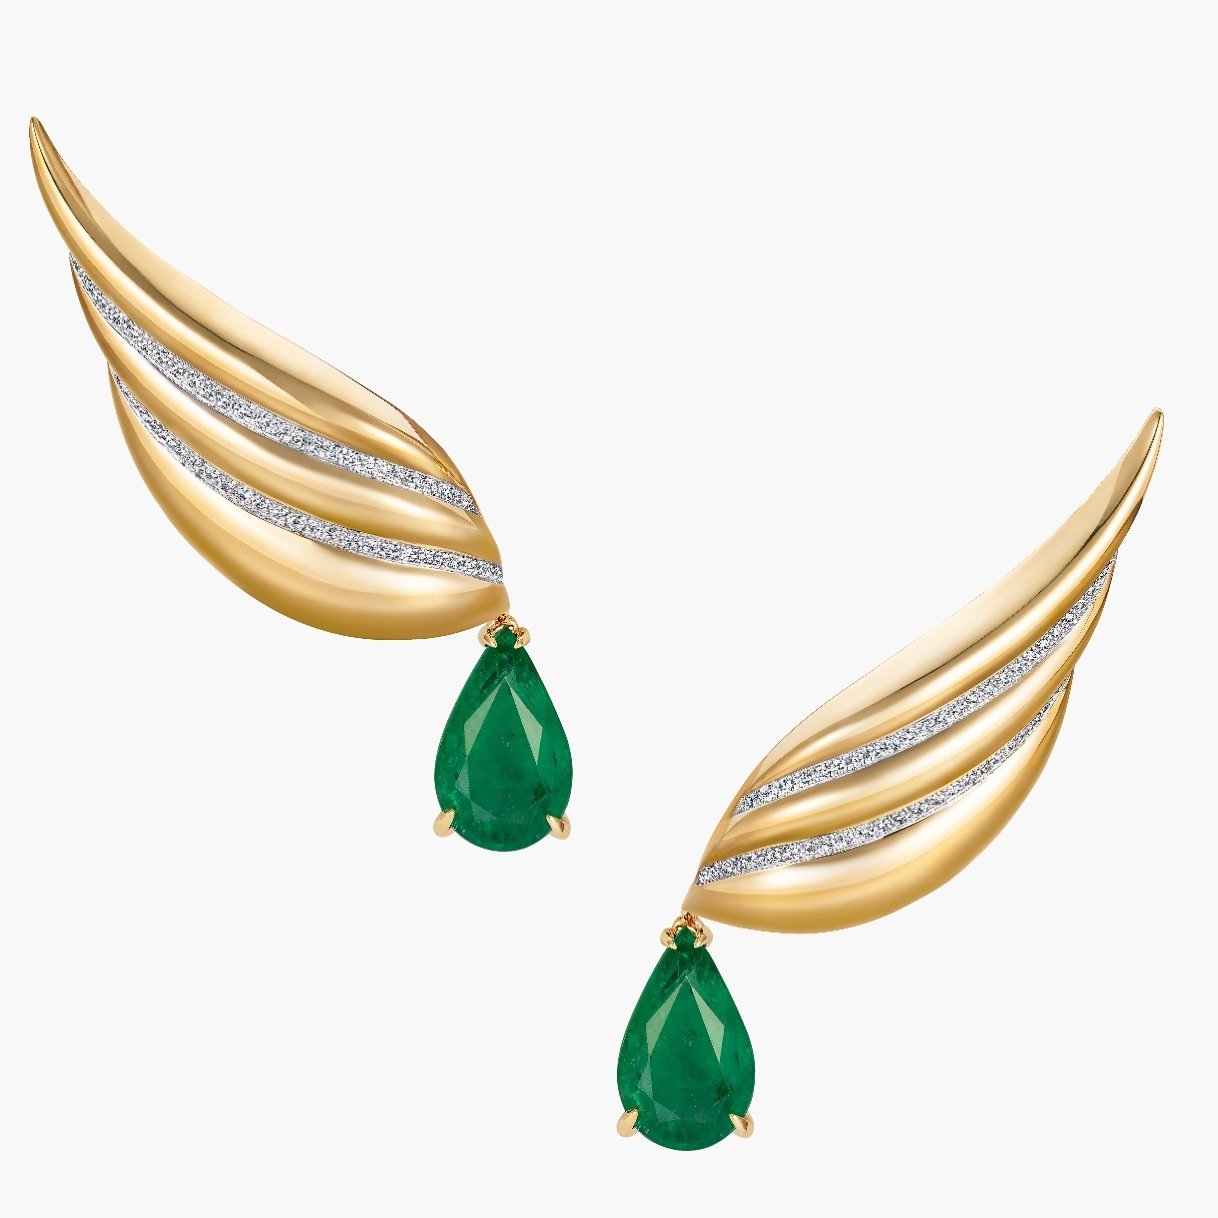 BLAZING TRAILS - The Hawk Earrings, with its golden feathers majestically arching up the ear 💚

A gold-rich collection featuring undulating lines accentuated with fine trails of natural white diamonds.

*The Falcon, a global symbol of power, strengt